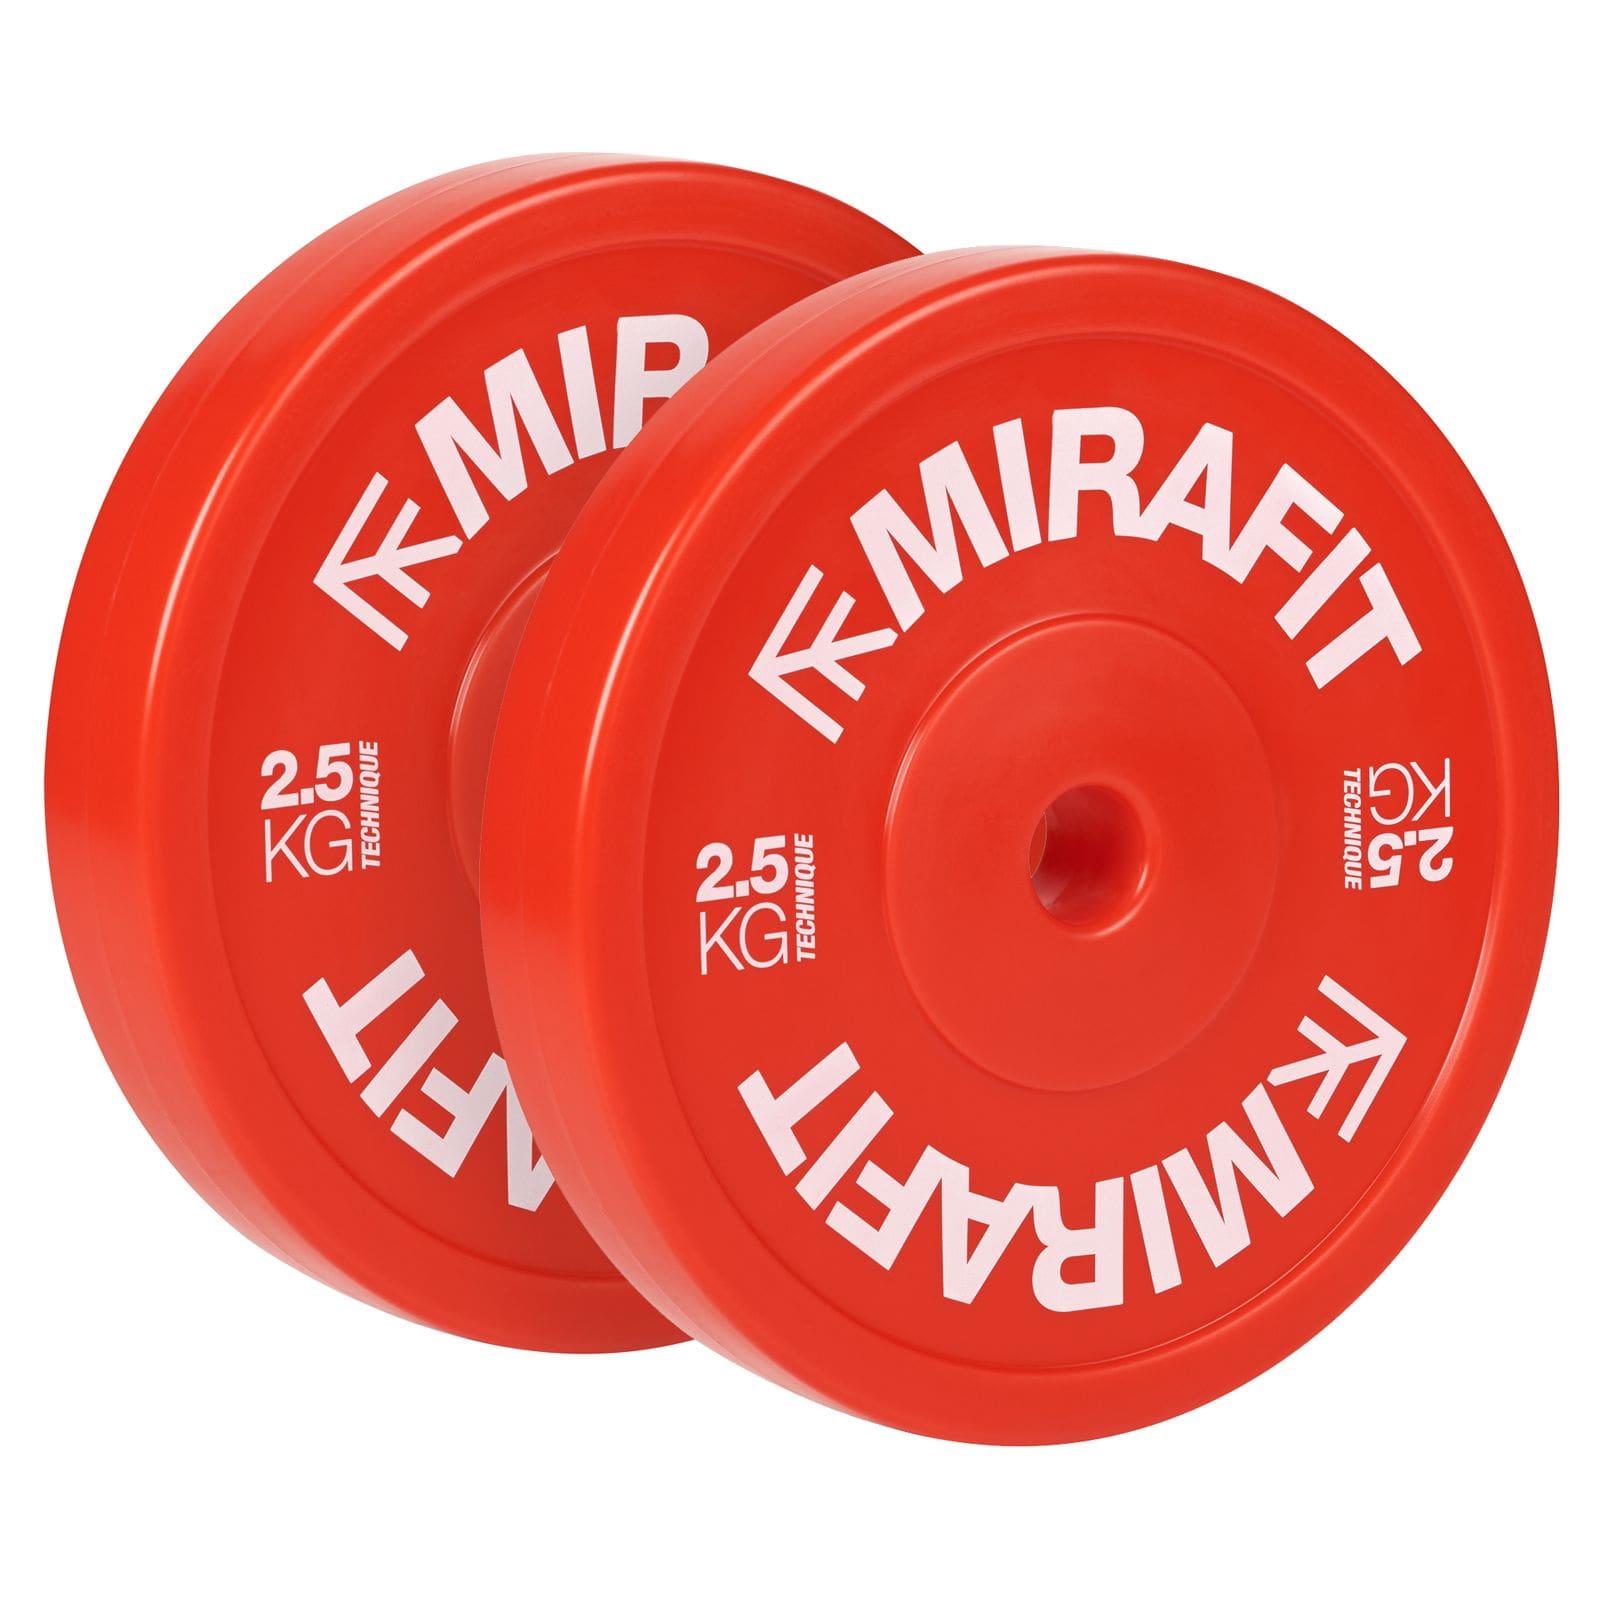 Mirafit Olympic Technique Bumper Plate Review 2.5kg red